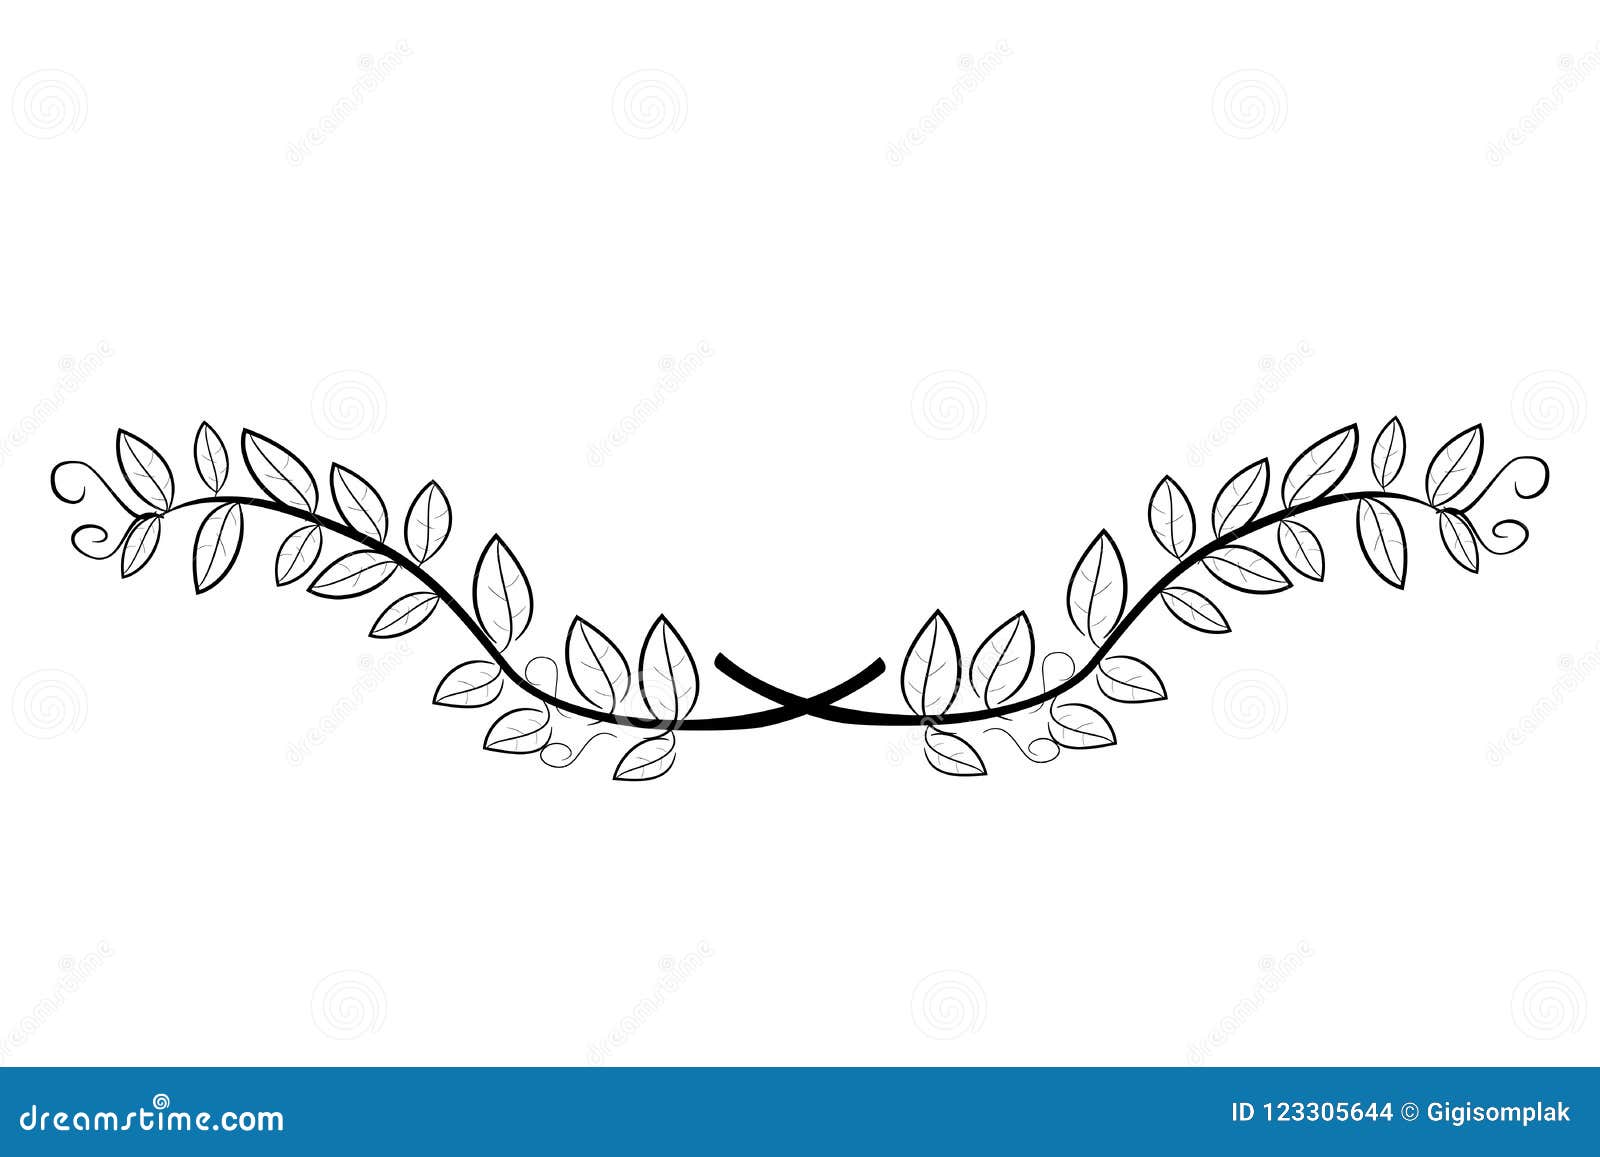 Doodle Laurel Wreath Vector Icon For Your Title Border Isolated On